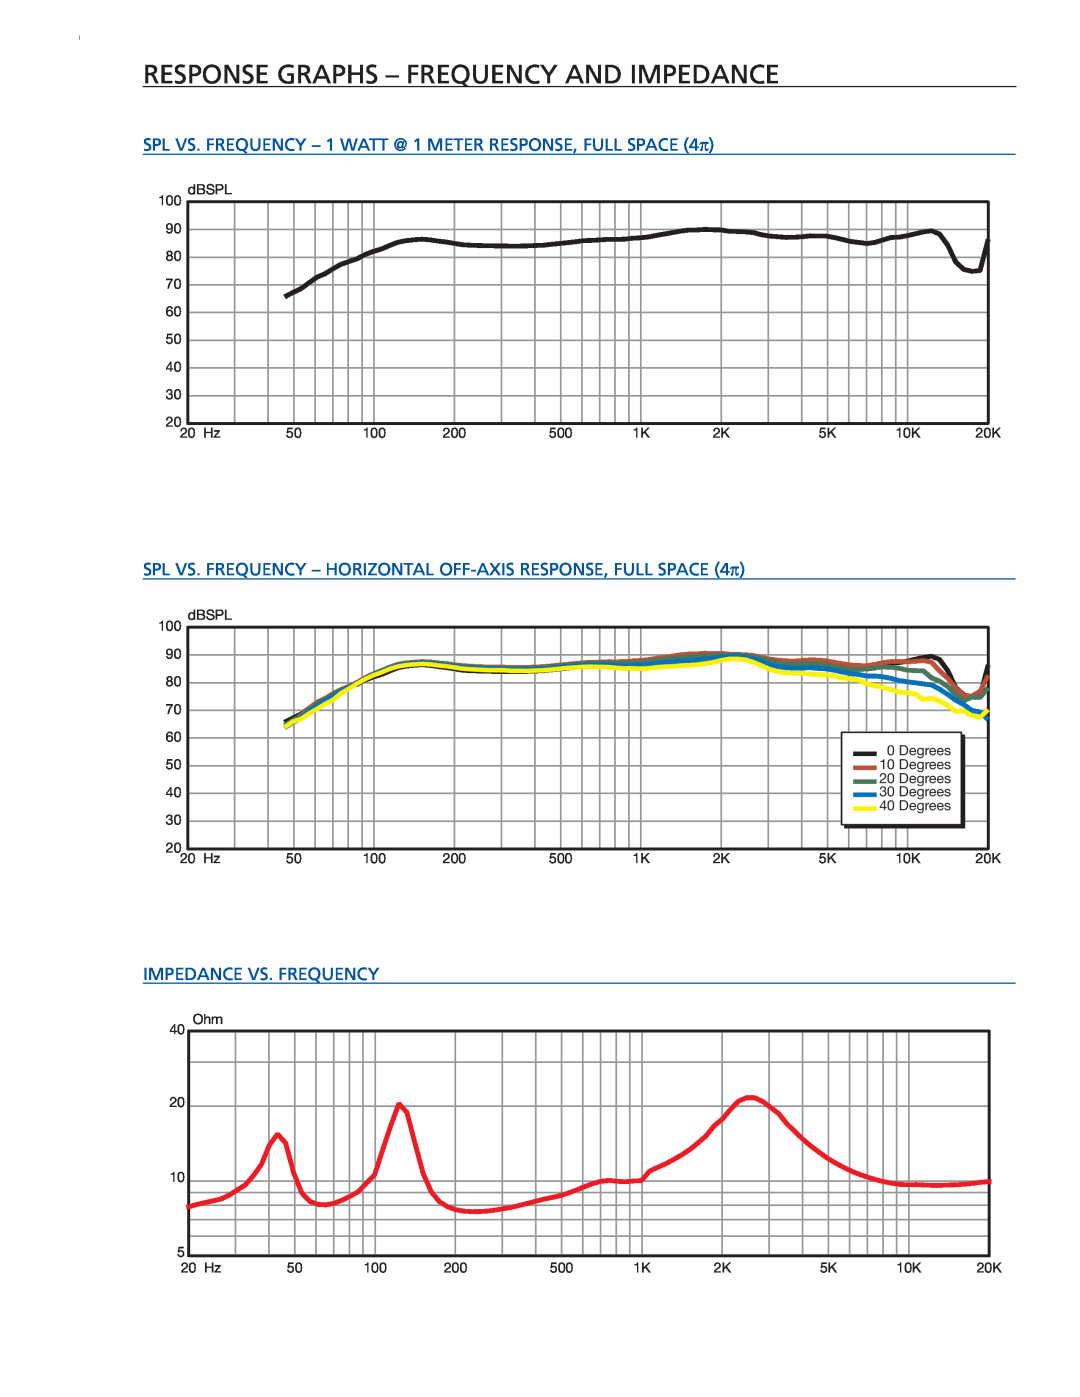 Extron electronic SI 26 warranty response graphs - frequency and impedance 